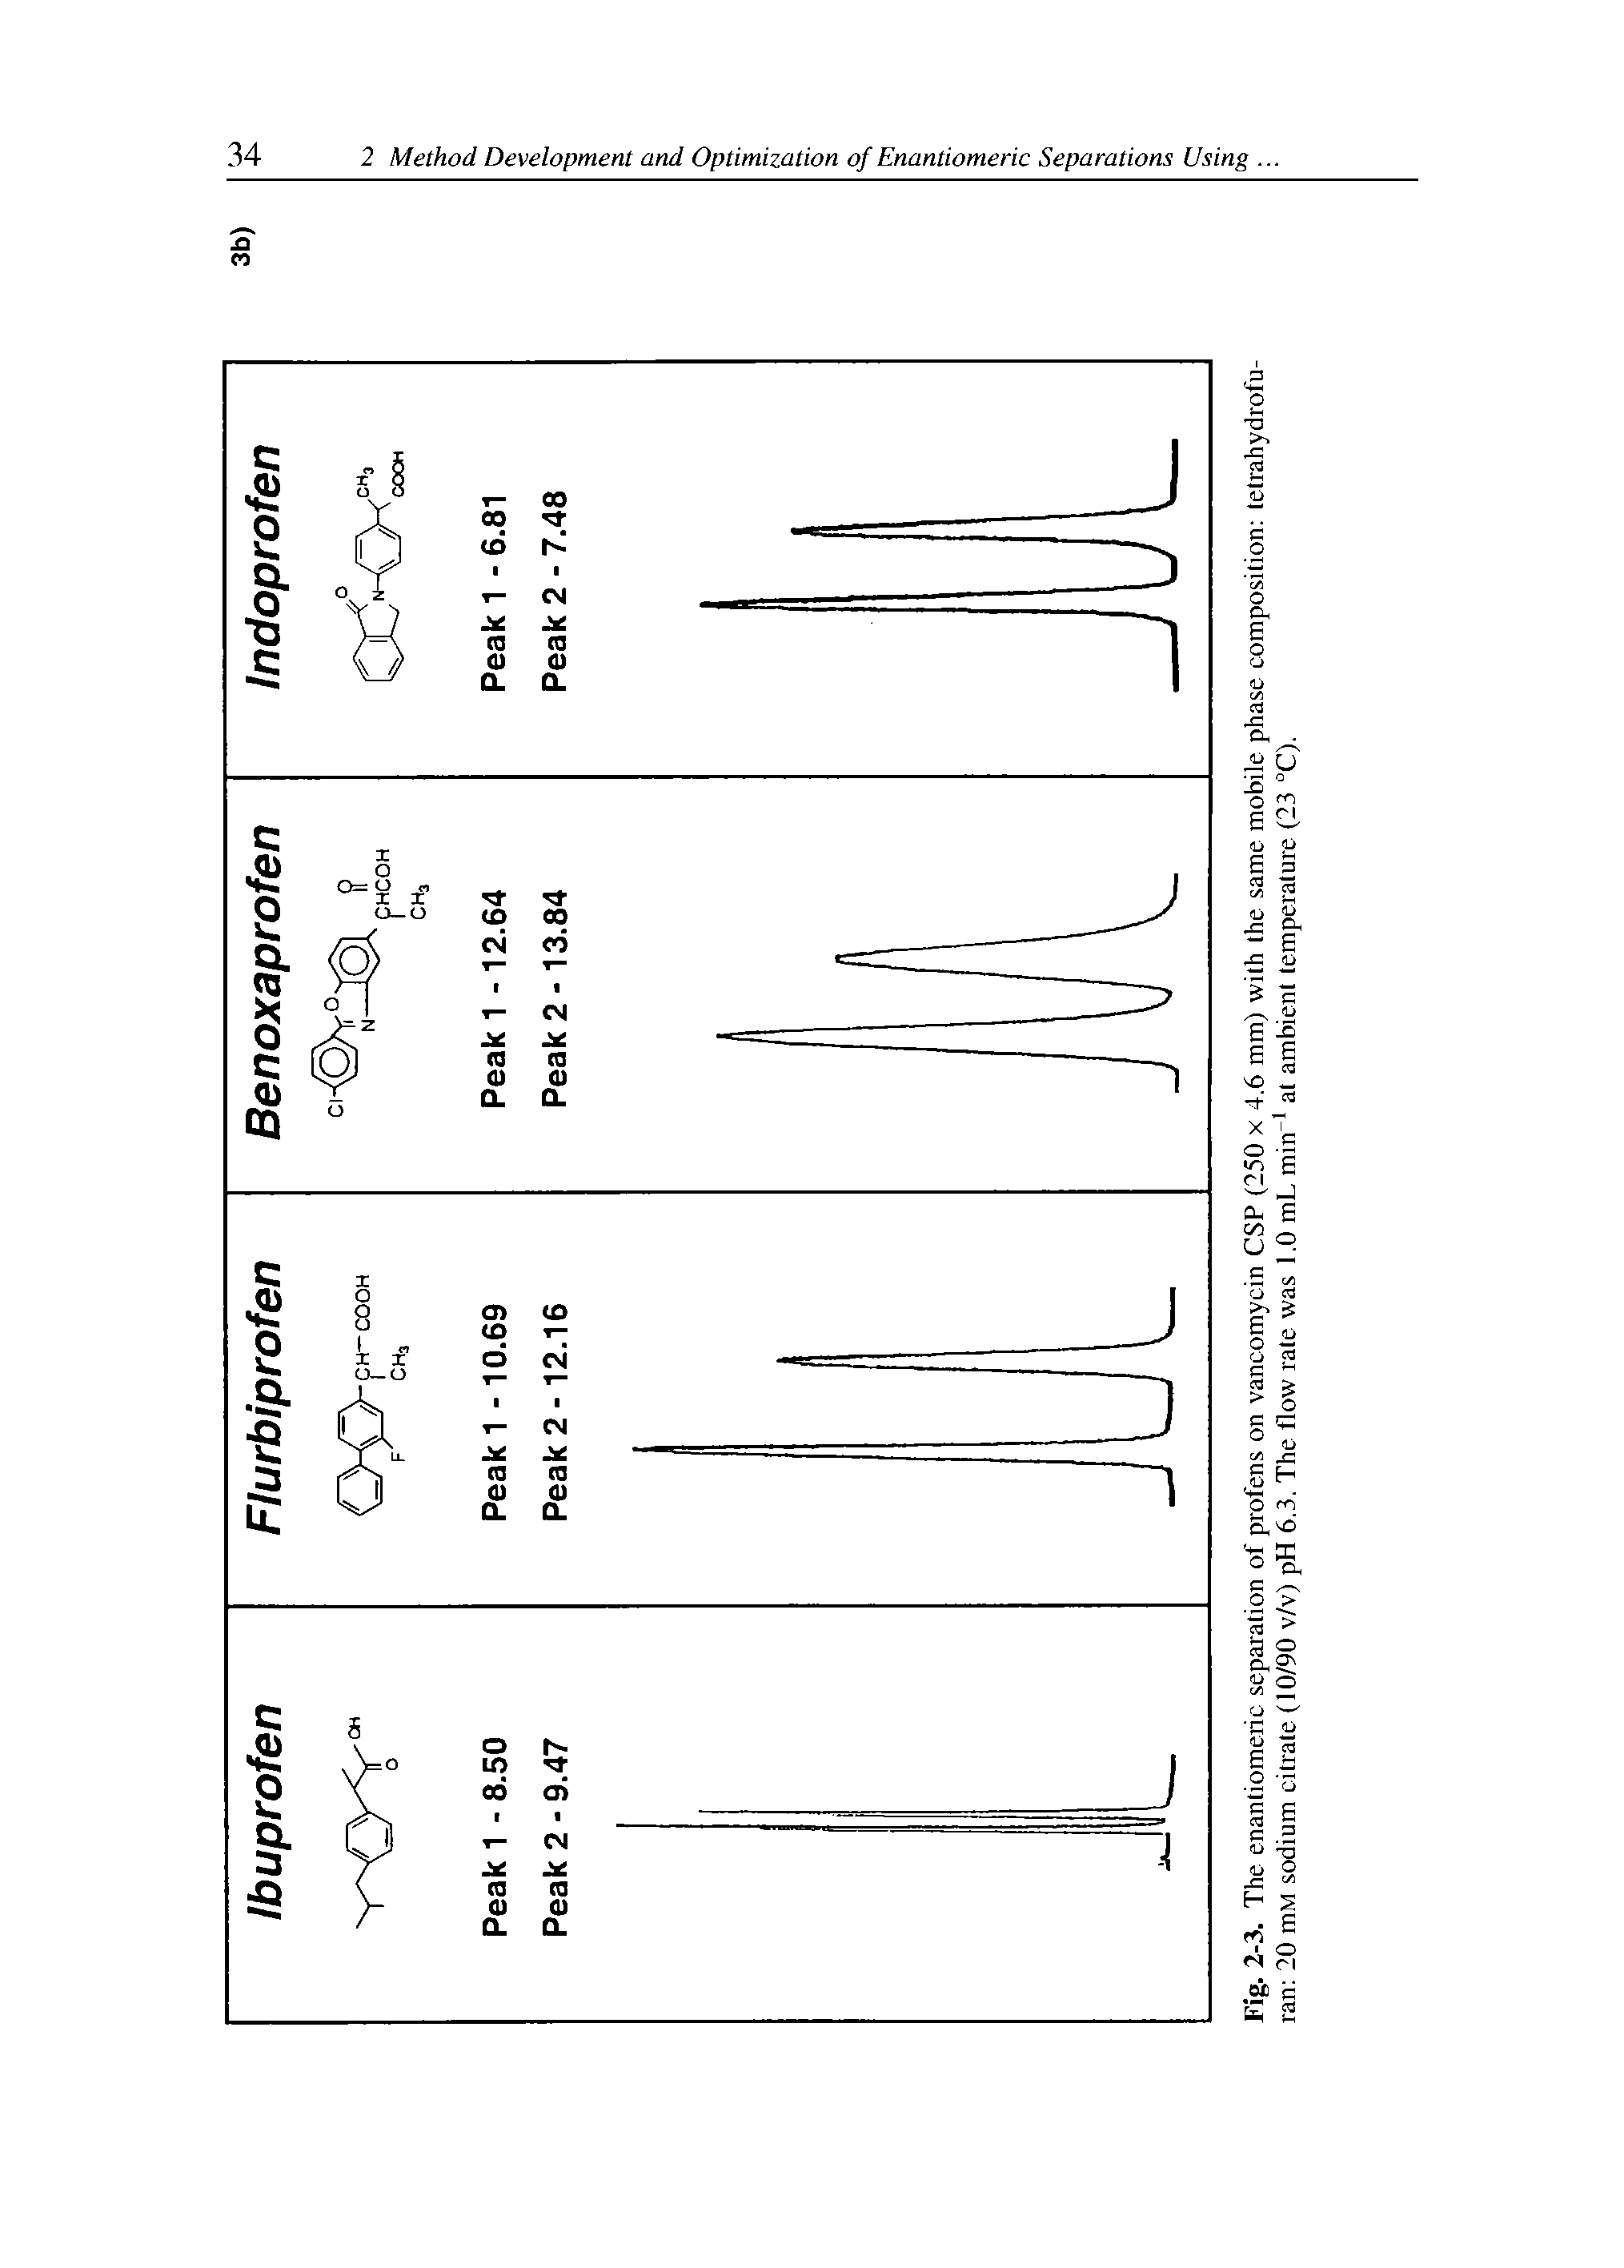 Fig. 2-3. The enantiomeric sepai ation of profens on vancomycin CSP (250 x 4.6 mm) with the same mobile phase composition tetrahydrofu-ran 20 mM sodium citrate (10/90 v/v) pH 6.3. The flow rate was 1.0 mL min at ambient temperature (23 C).